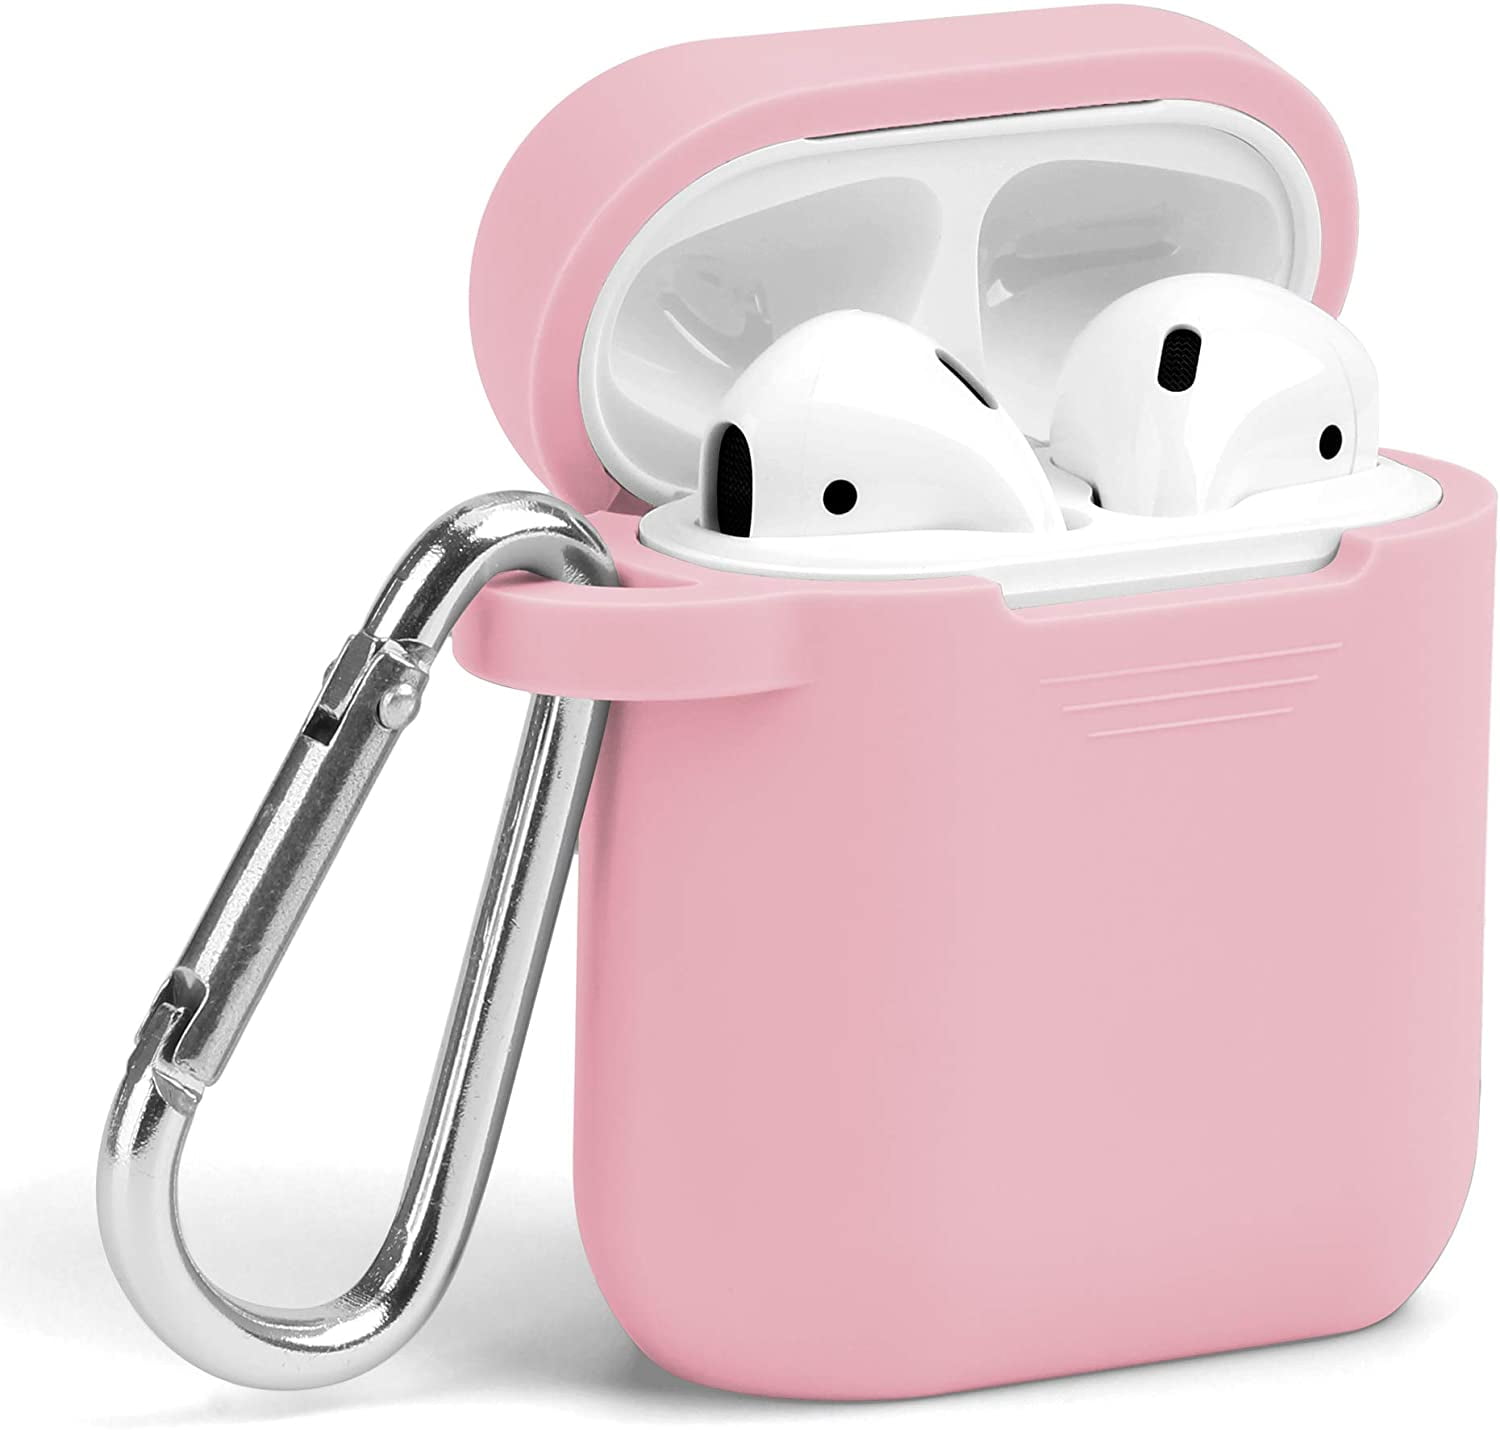 AirPods 3rd Gen Case Cover with Cleaner Kit,Soft Silicone Protective Case  for Apple AirPods 3rd Generation Charging Case with Keychain,Shockproof